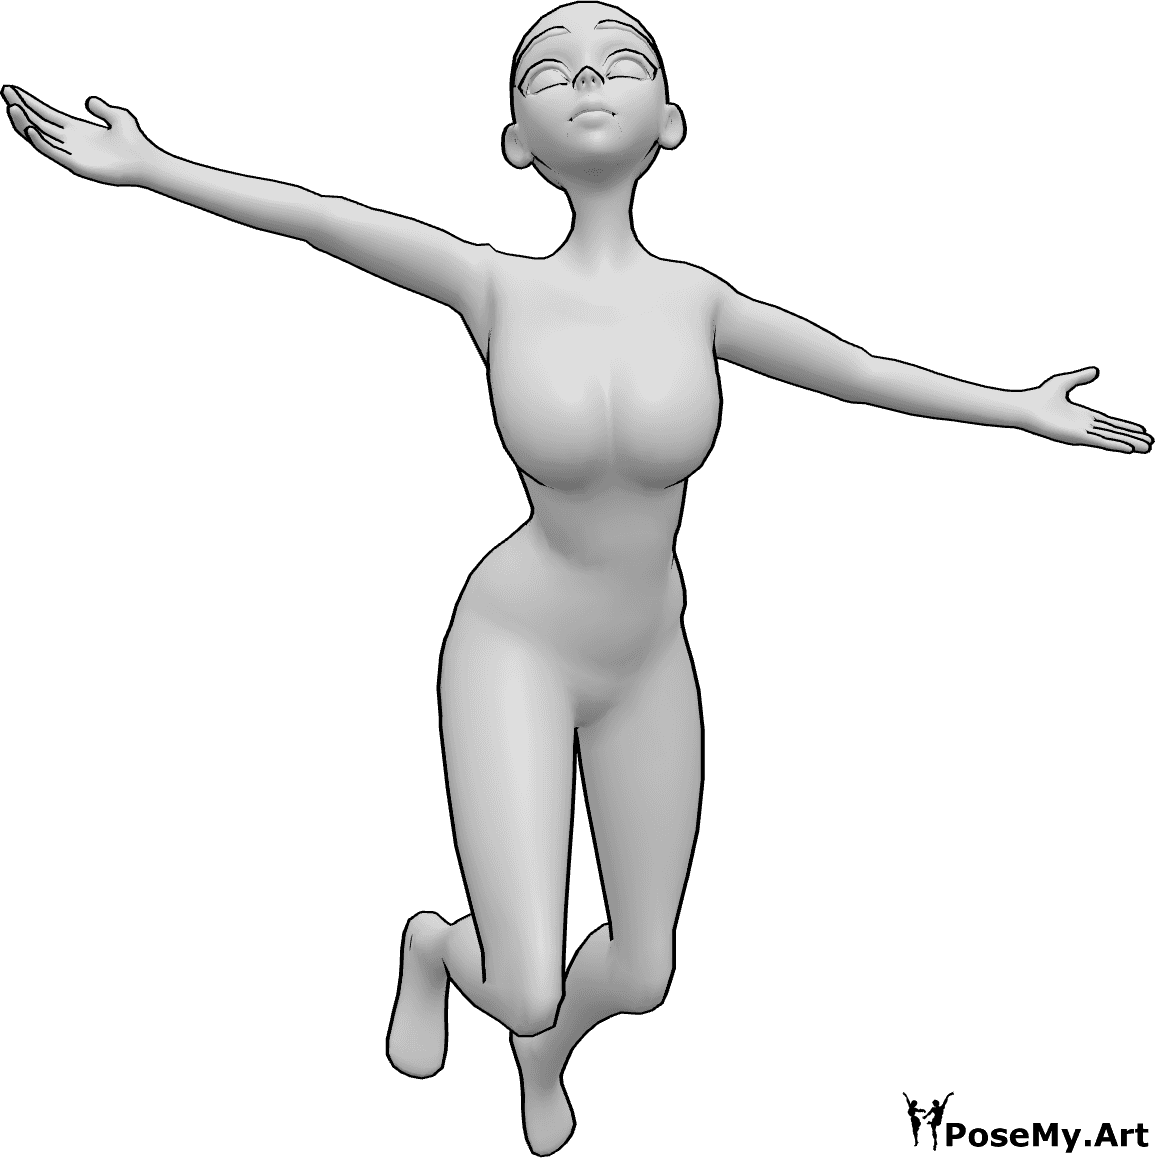 Anime Body Poses - Anime happy jumping pose